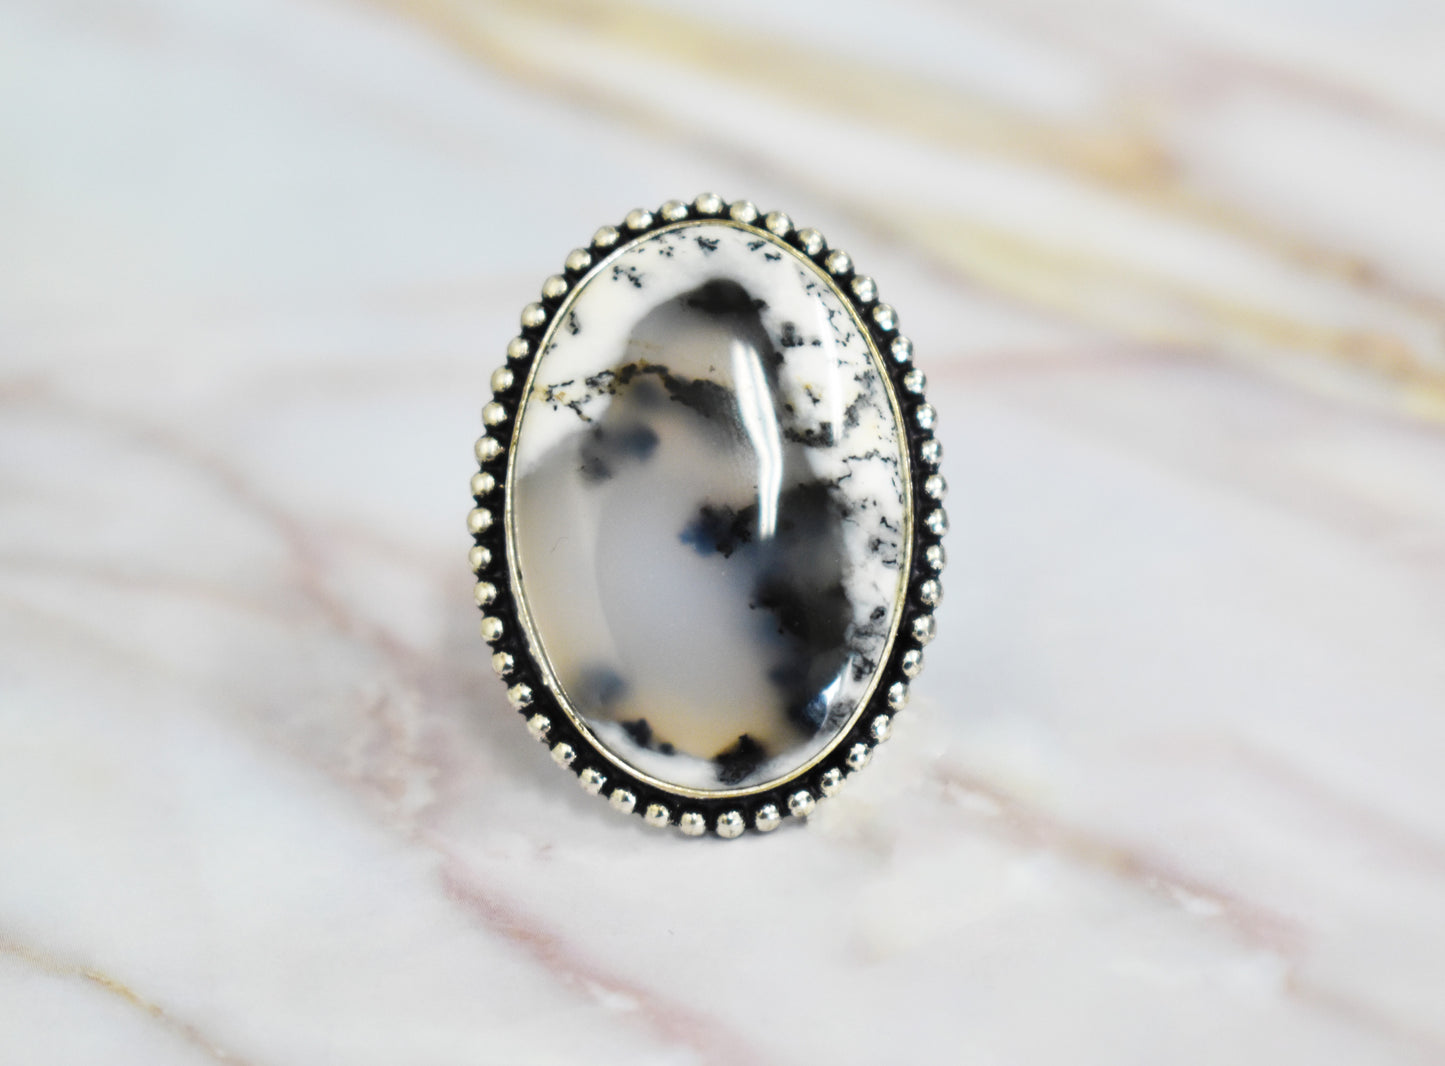 stones-of-transformation - Dendritic Opal Ring (Size 9) - Stones of Transformation - 